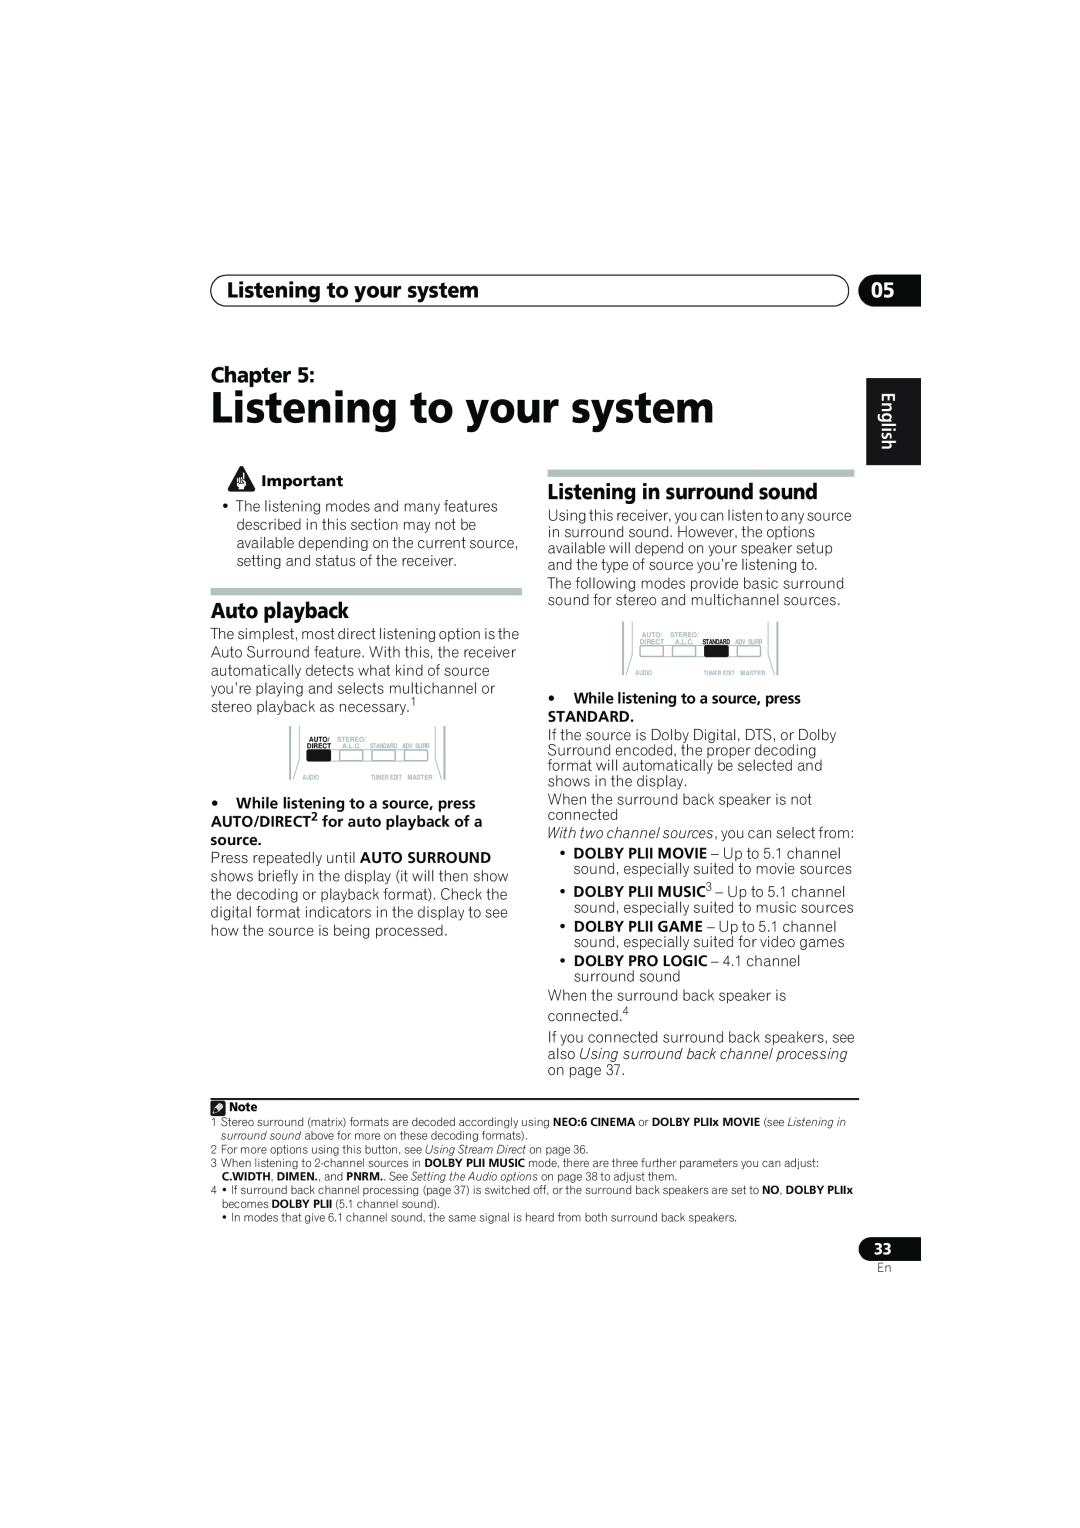 Pioneer VSX-819H-K manual Listening to your system Chapter, Auto playback, Listening in surround sound, English 